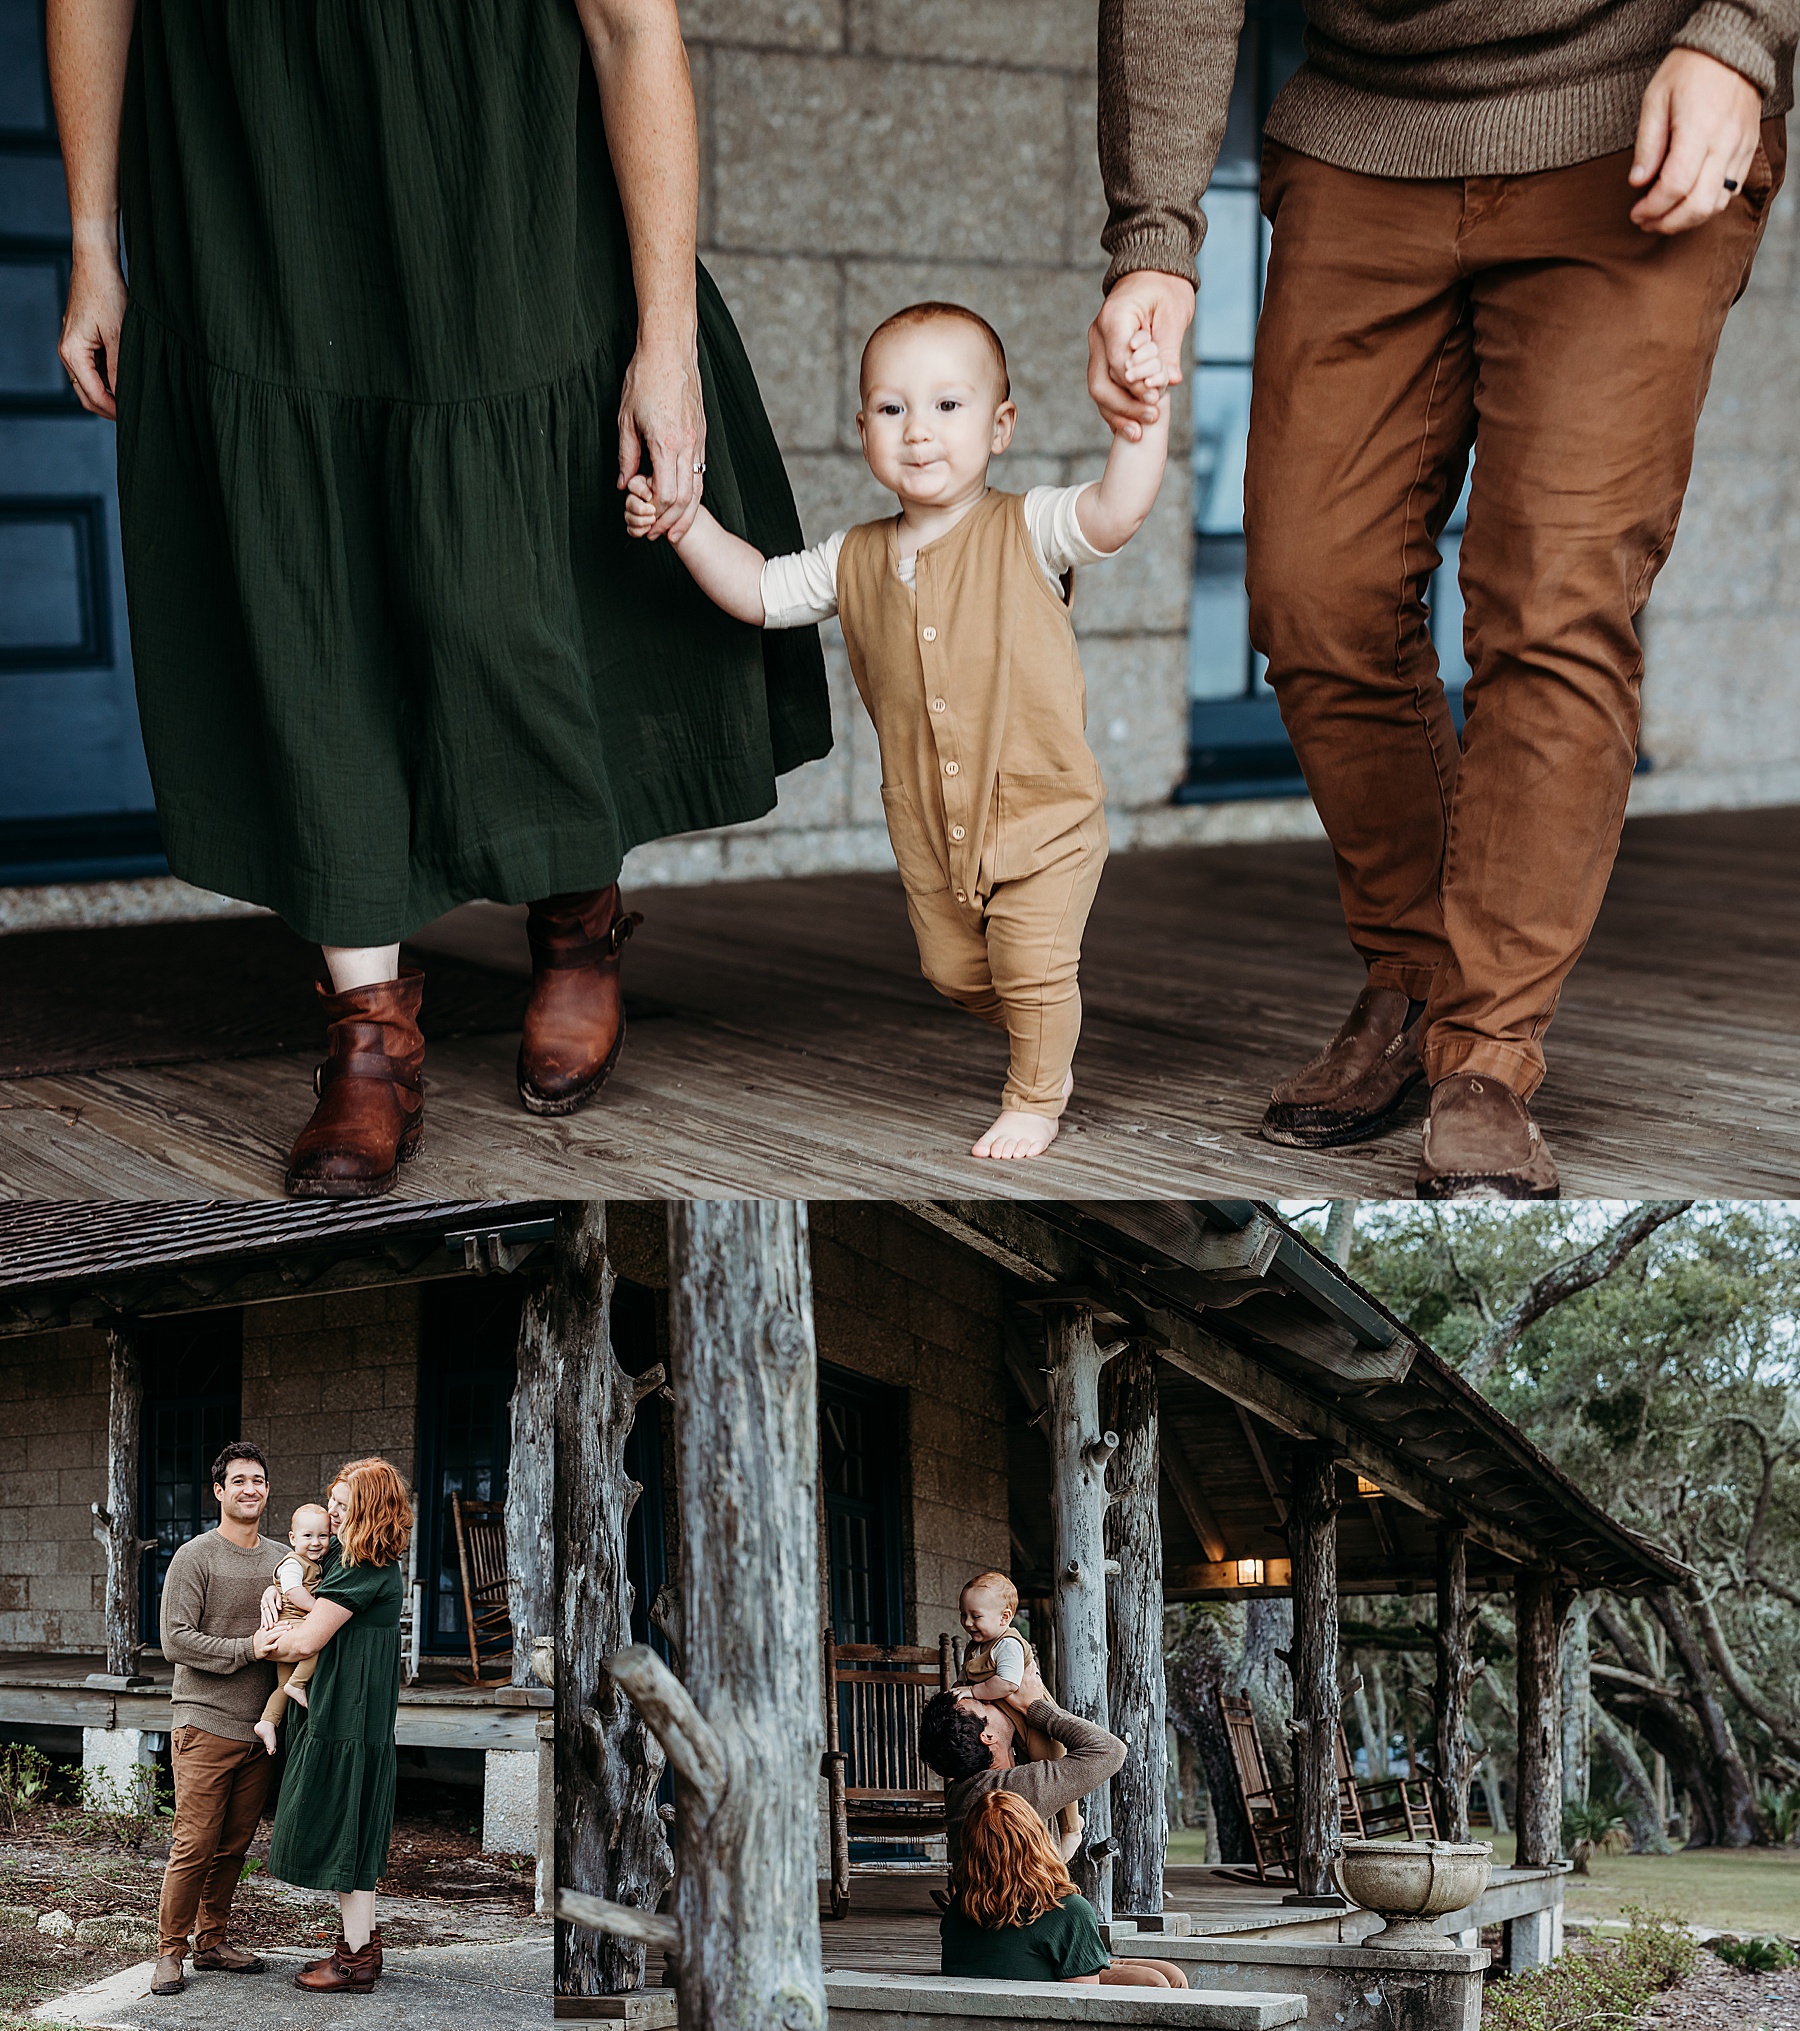 family walking together on wooden porch wearing earth tone clothing